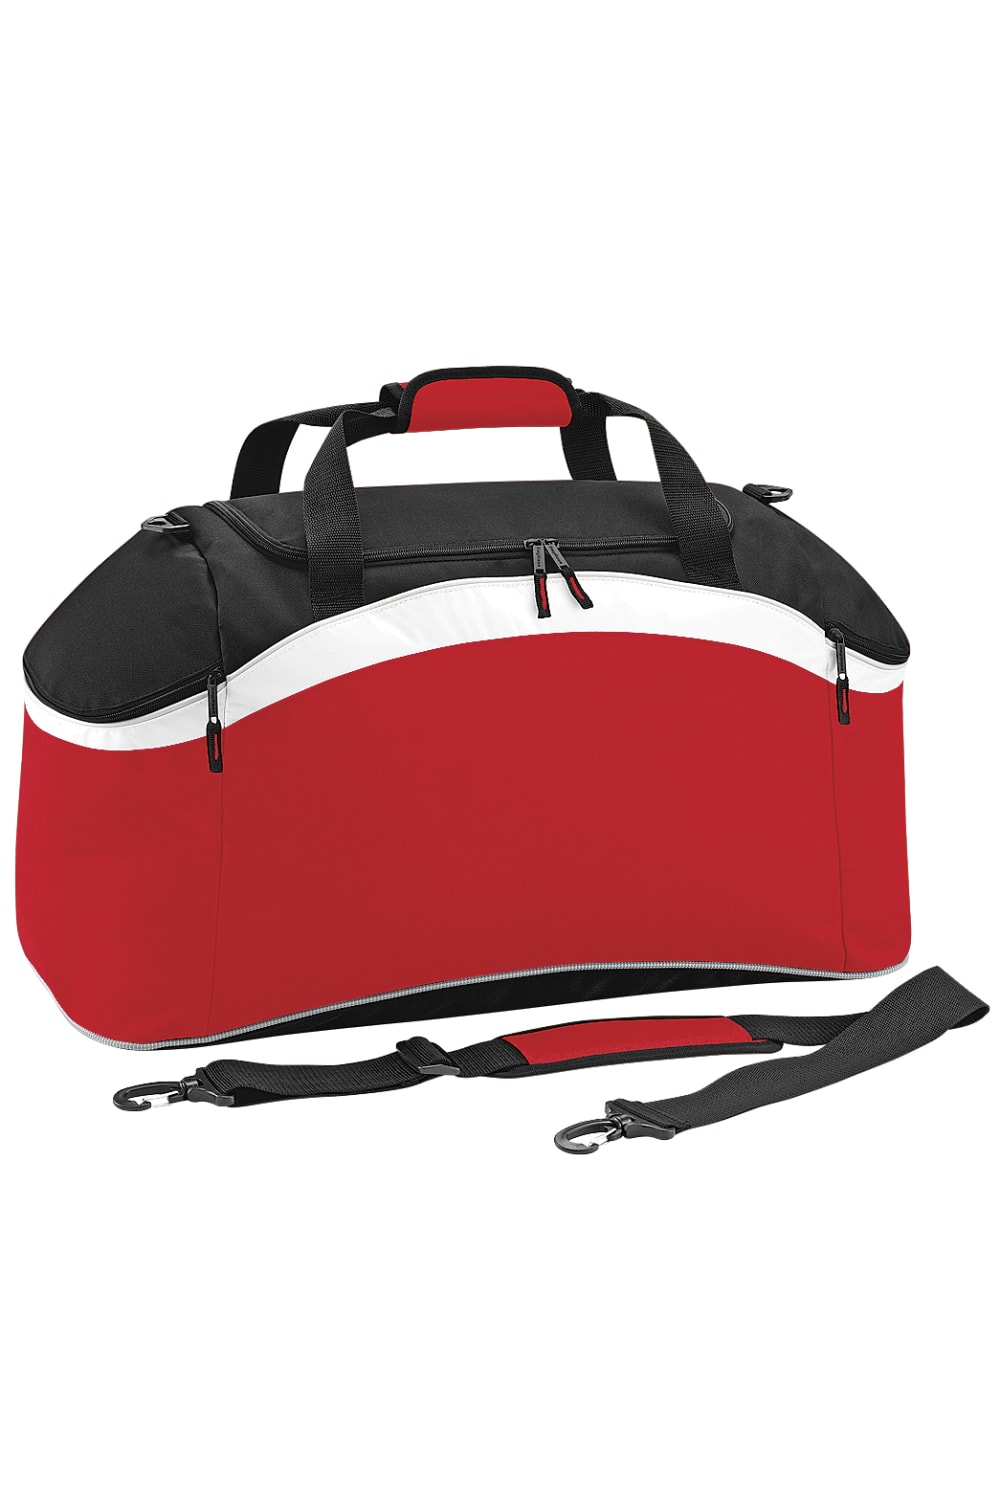 BagBase Teamwear Sport Holdall / Duffel Bag (54 Liters) (Pack of 2) (Classic Red/ Black/ White) (One Size)